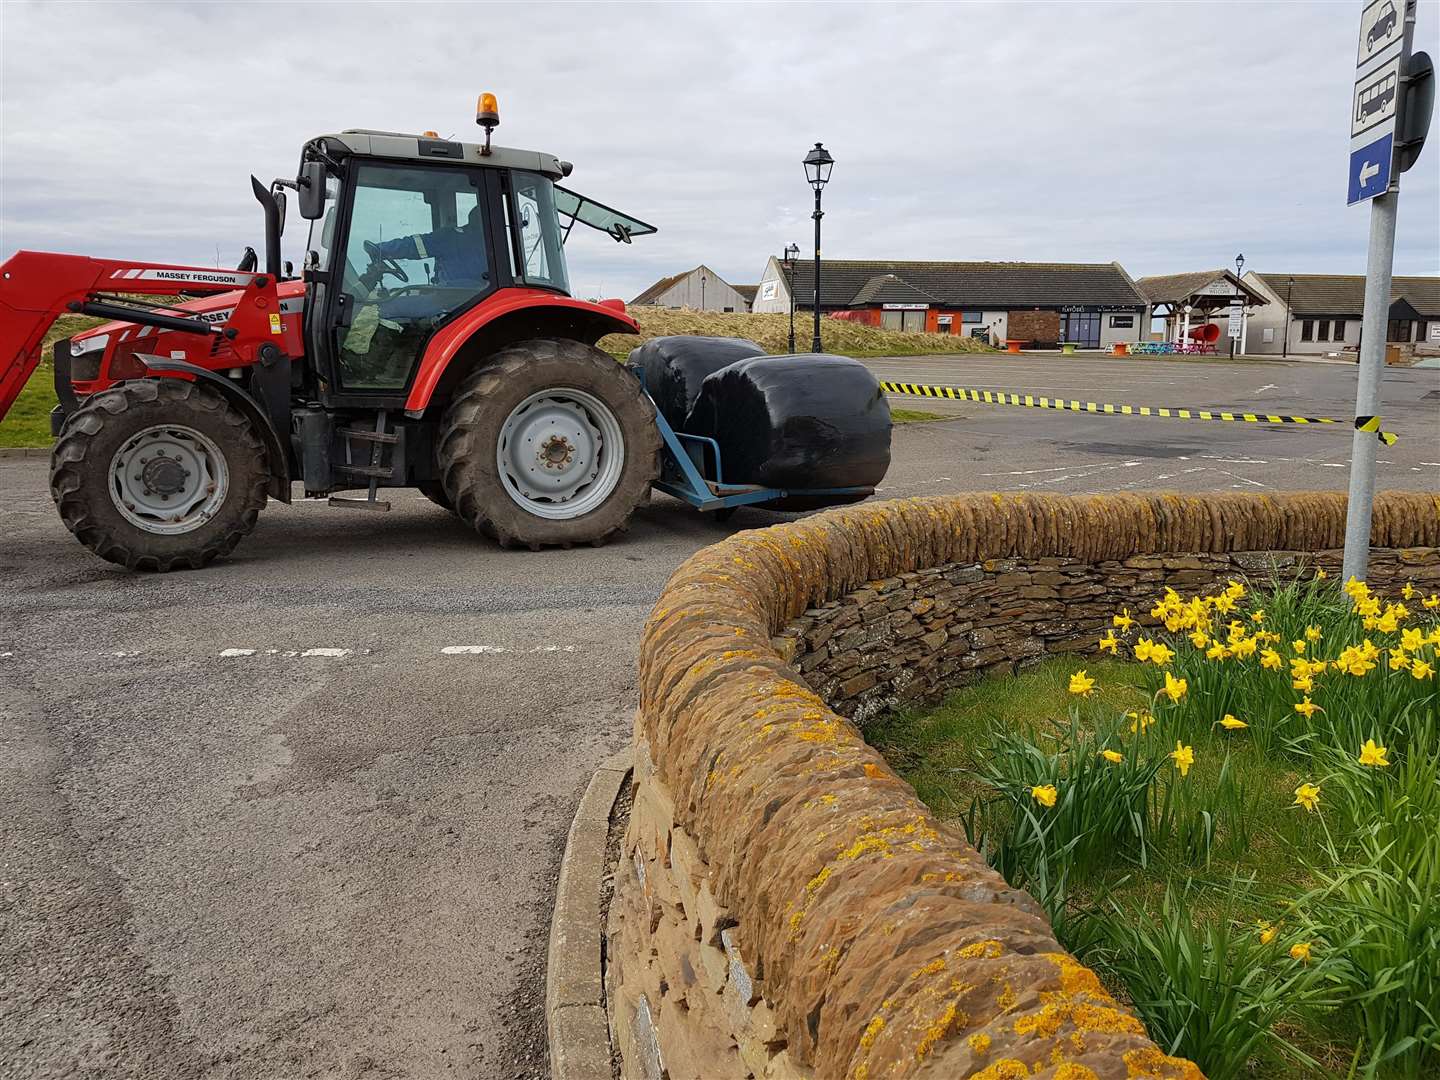 William Steven on the tractor closing off the car park at John O'Groats.